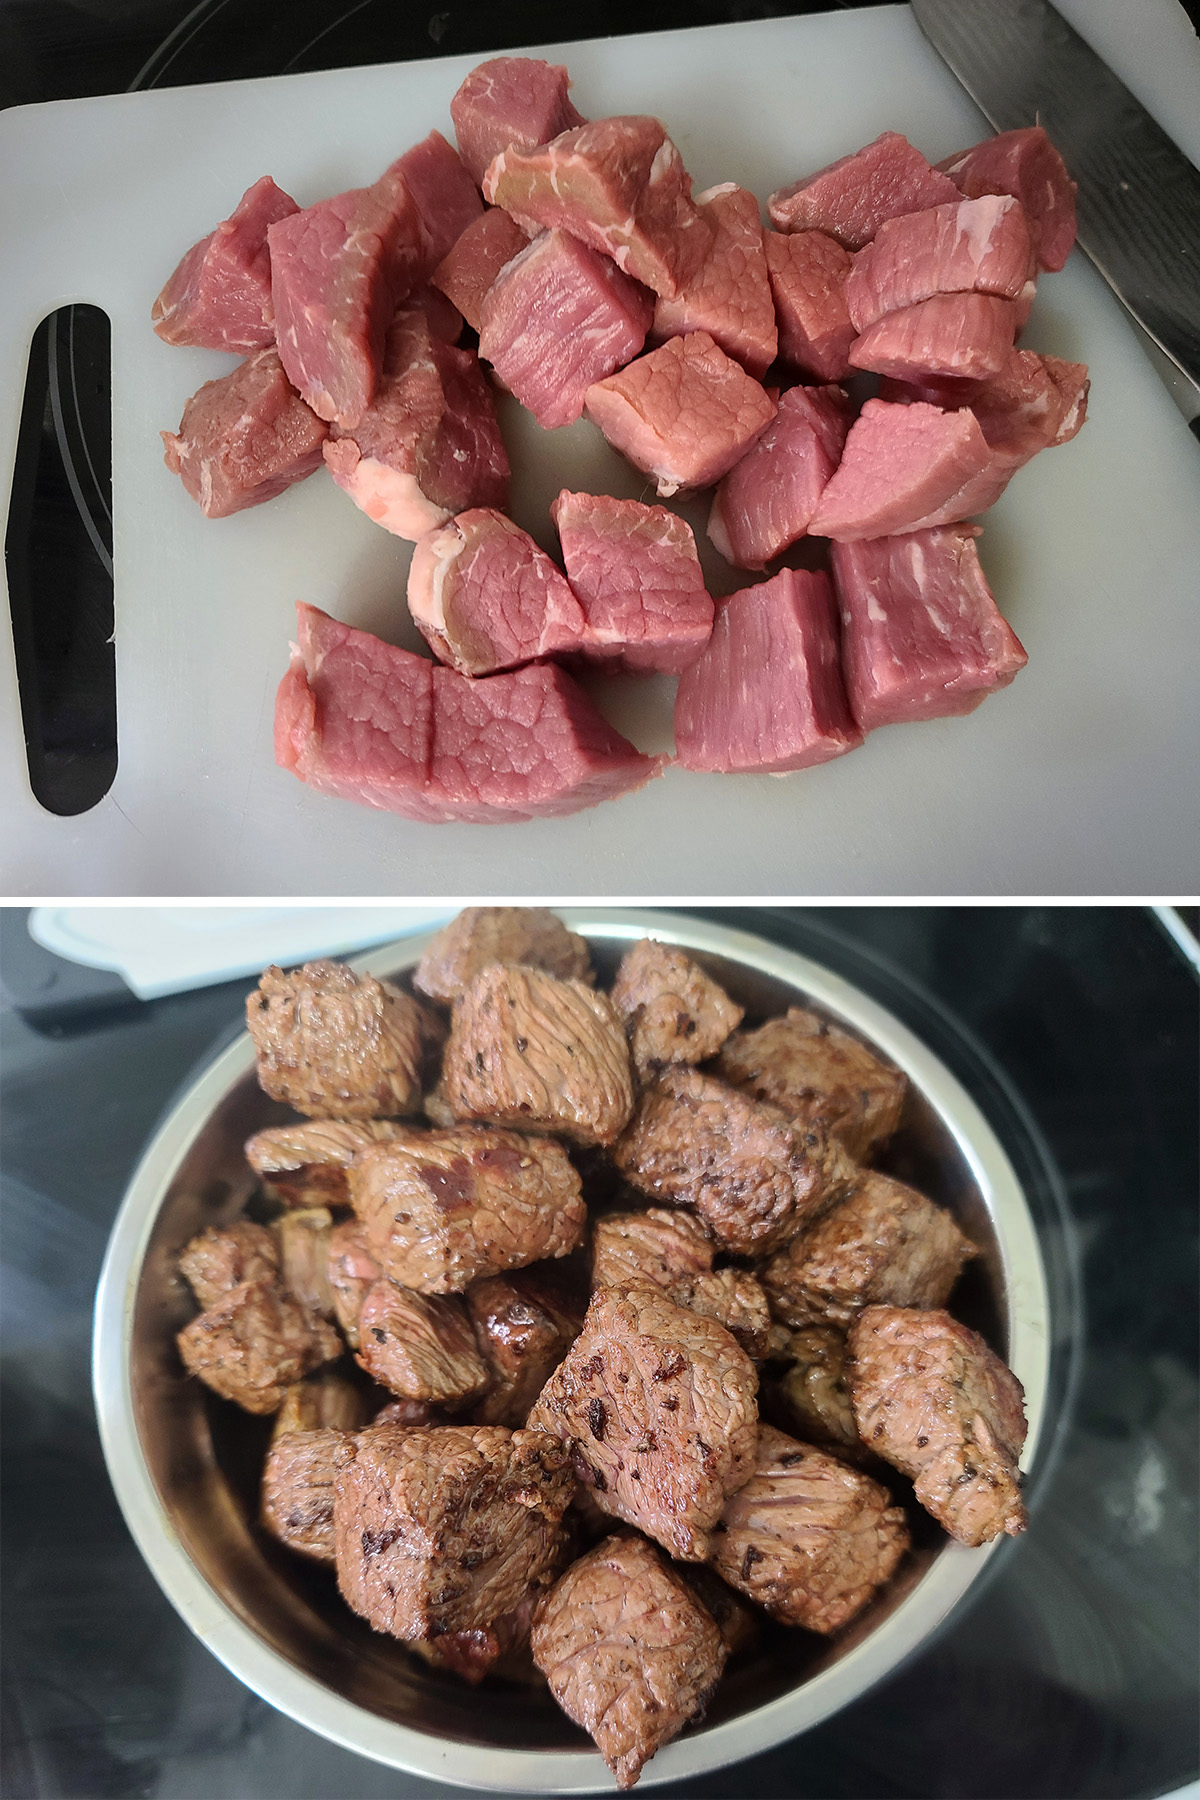 A two part image showing chunks of beef before and after searing.